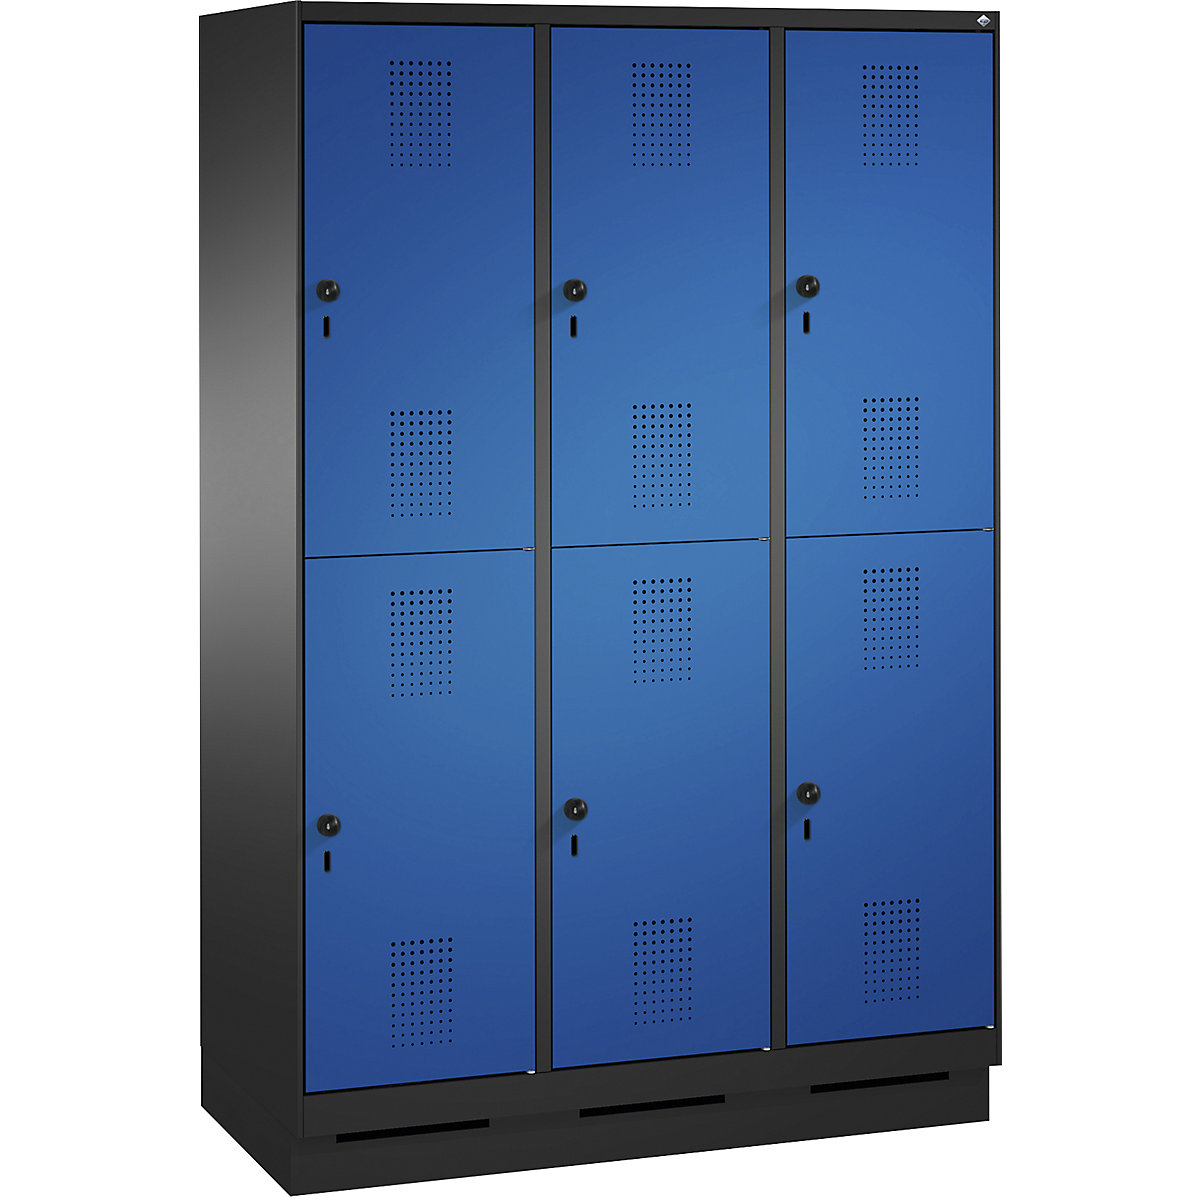 EVOLO cloakroom locker, double tier, with plinth – C+P, 3 compartments, 2 shelf compartments each, compartment width 400 mm, black grey / gentian blue-15